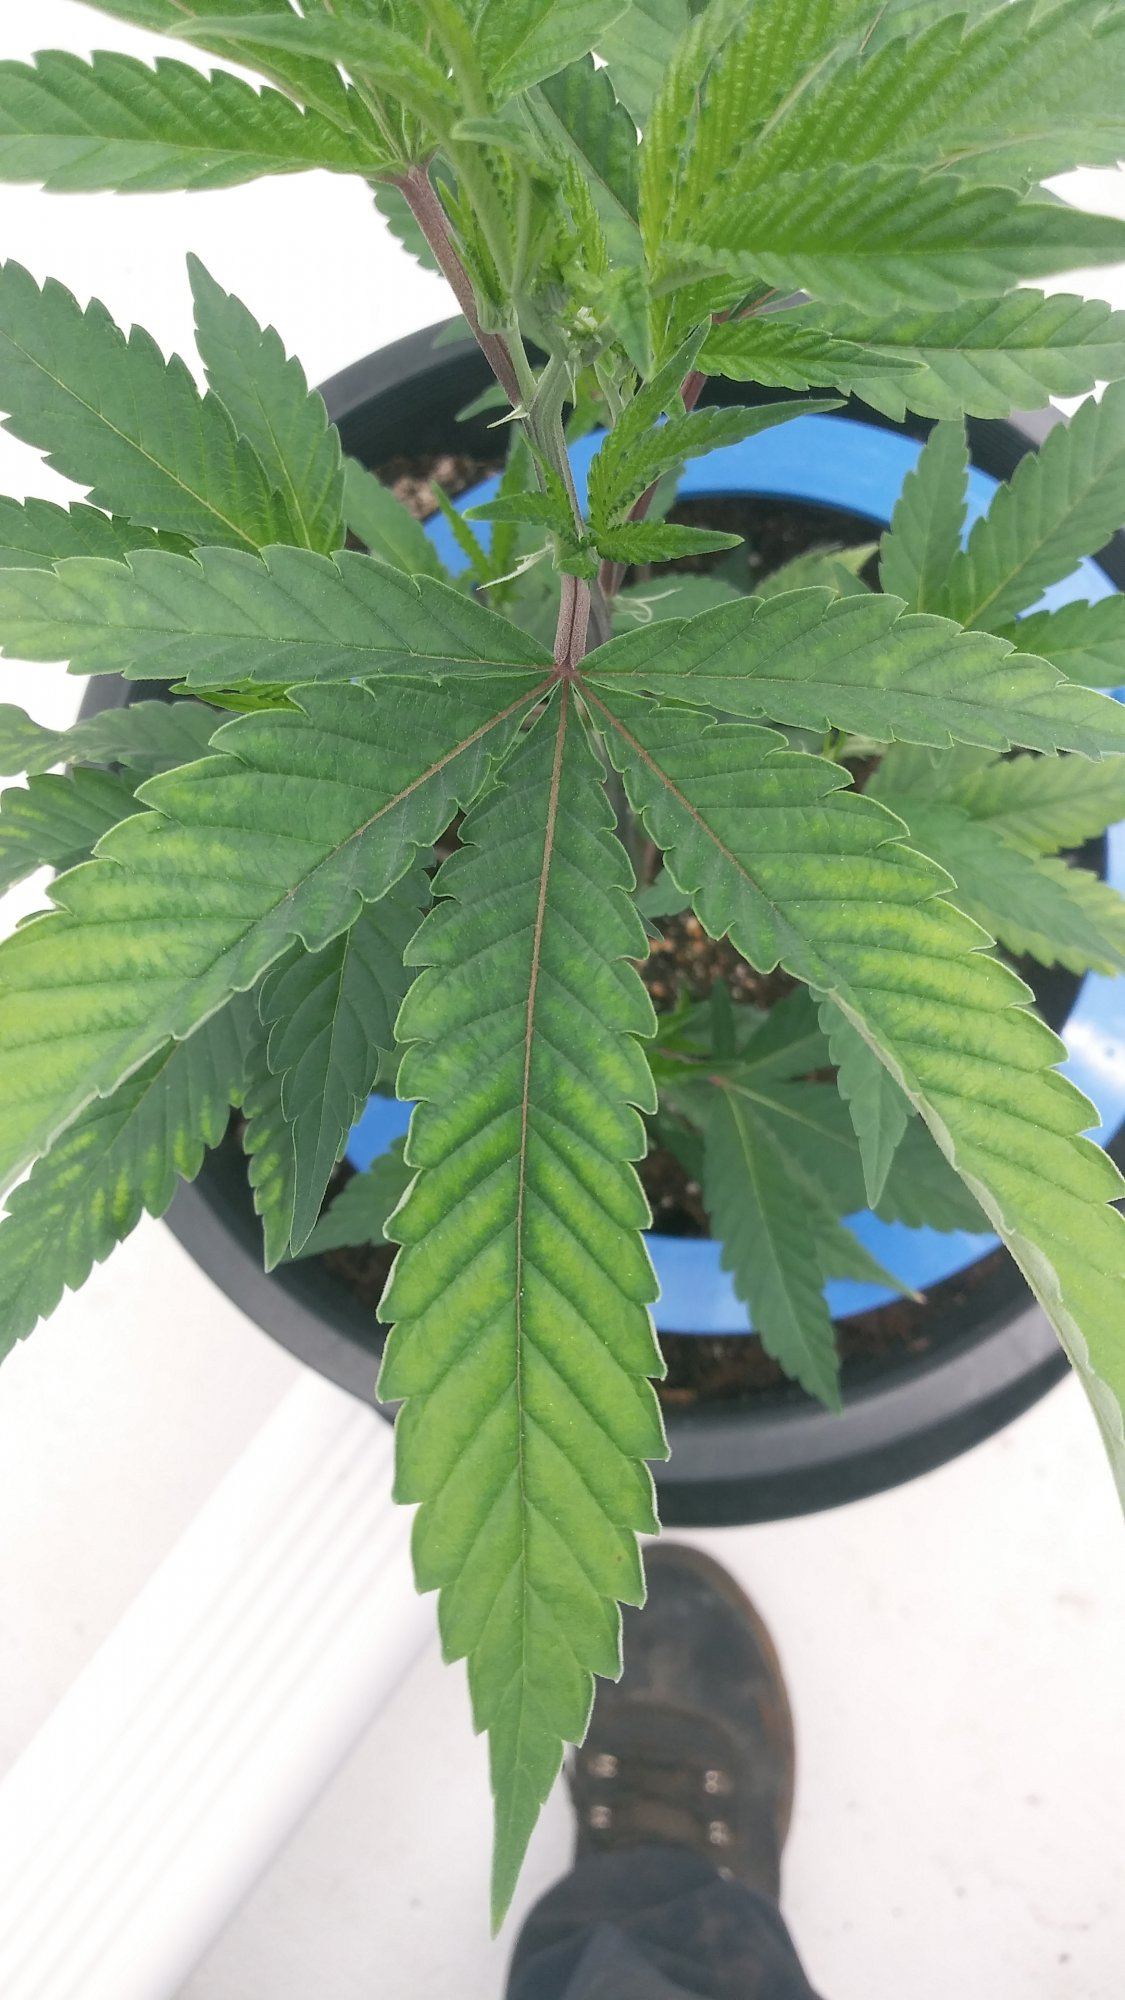 Name the deficiency